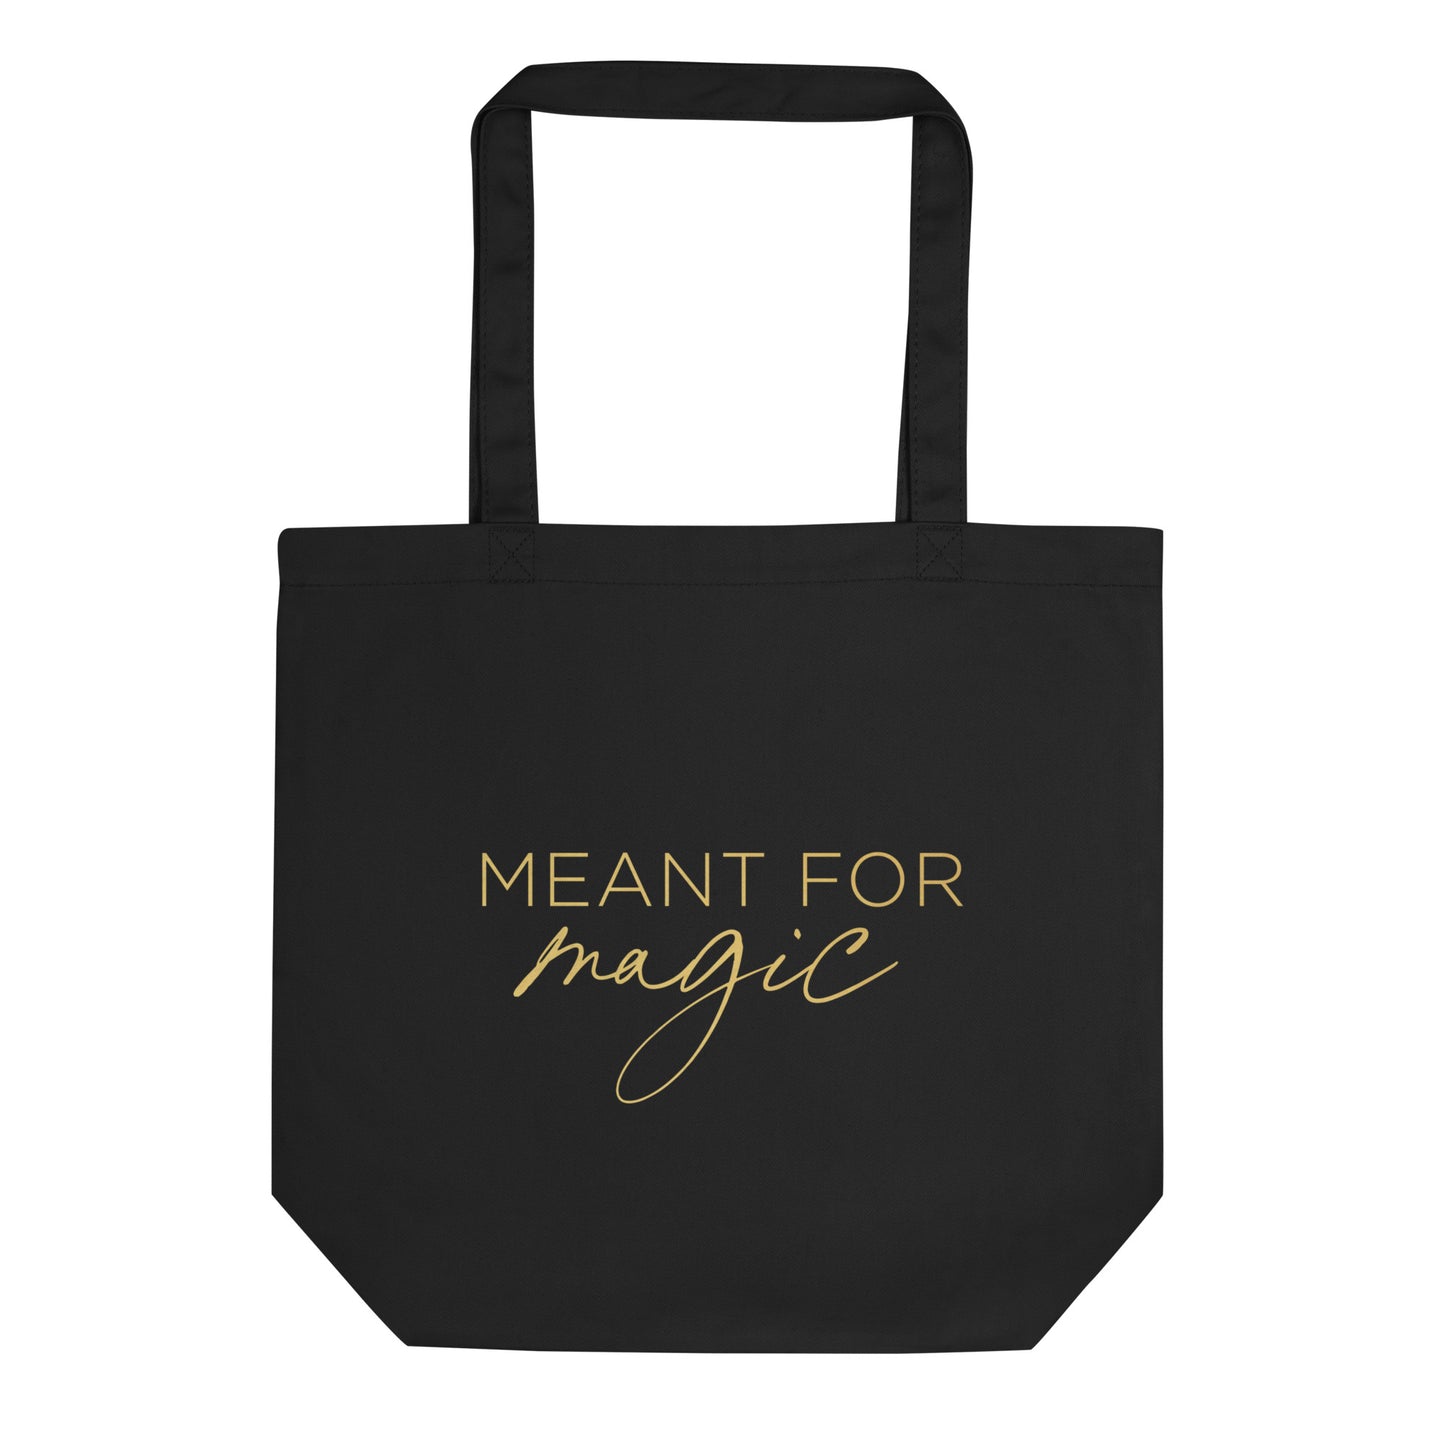 The Meant for Magic Eco Tote Bag